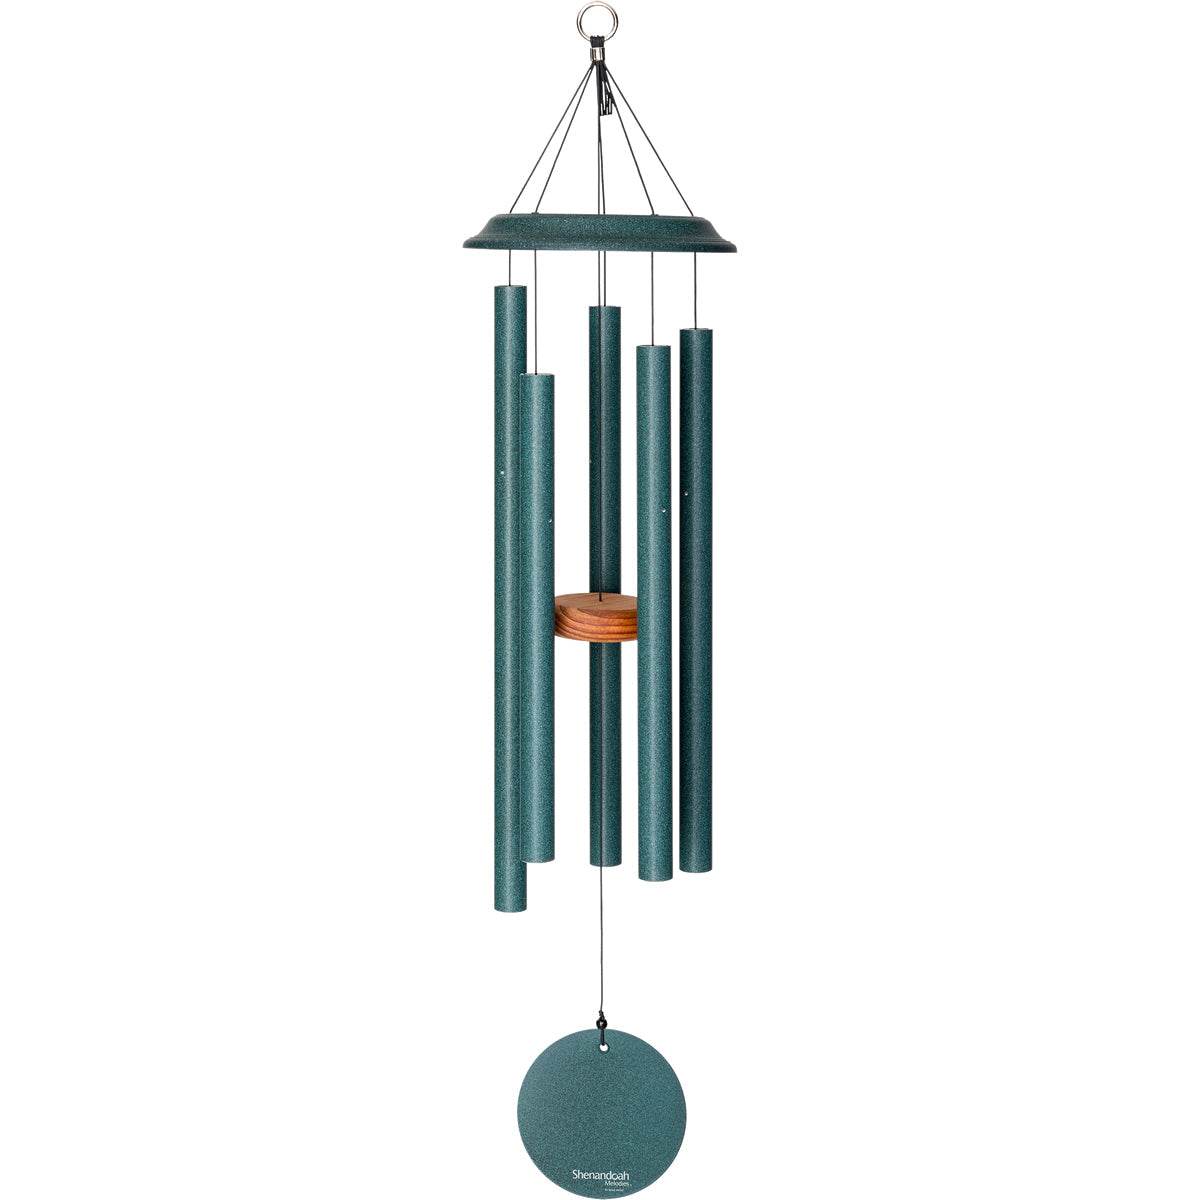 Shenandoah Melodies 35-inch Wind Chime - Green